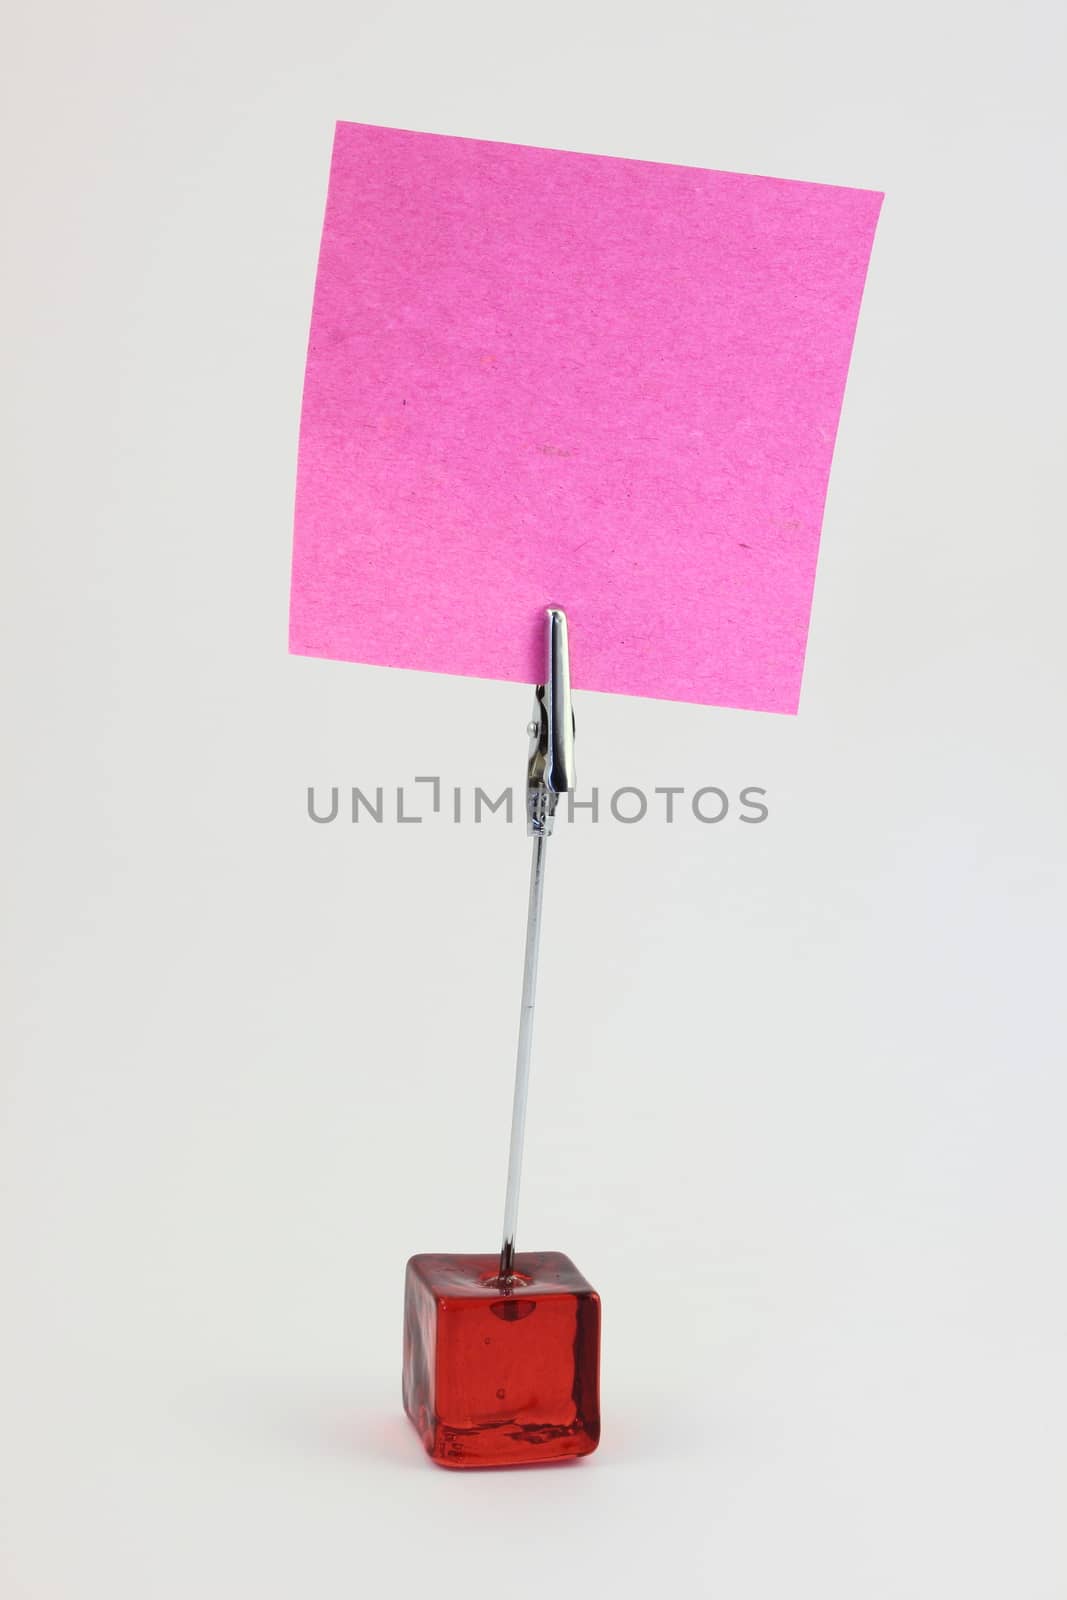 Red glass note-holder with alligator clip and blank pink note